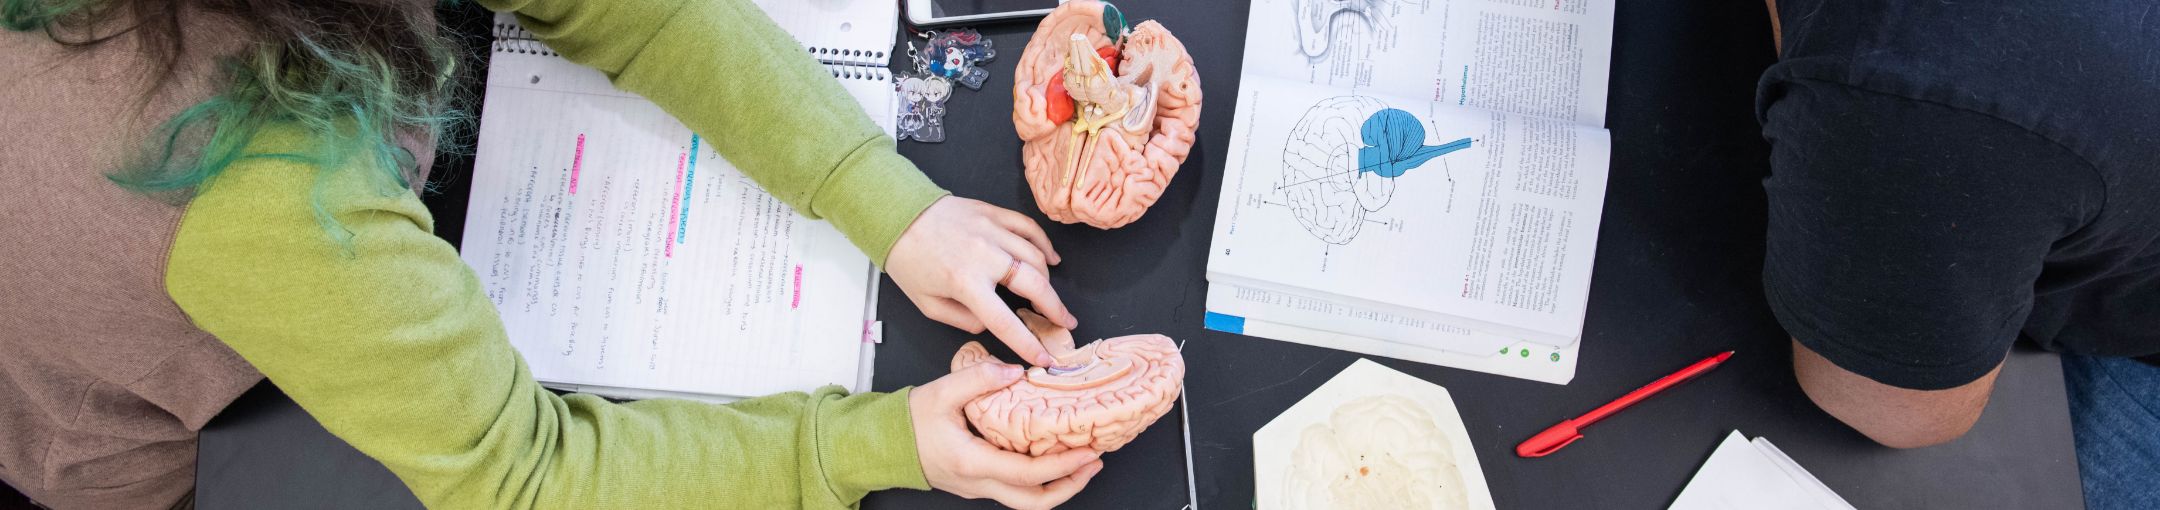 Overhead view of two people sitting on opposite sides of a table while one holds half of a model of a brain and another looks at a textbook image of a brain.